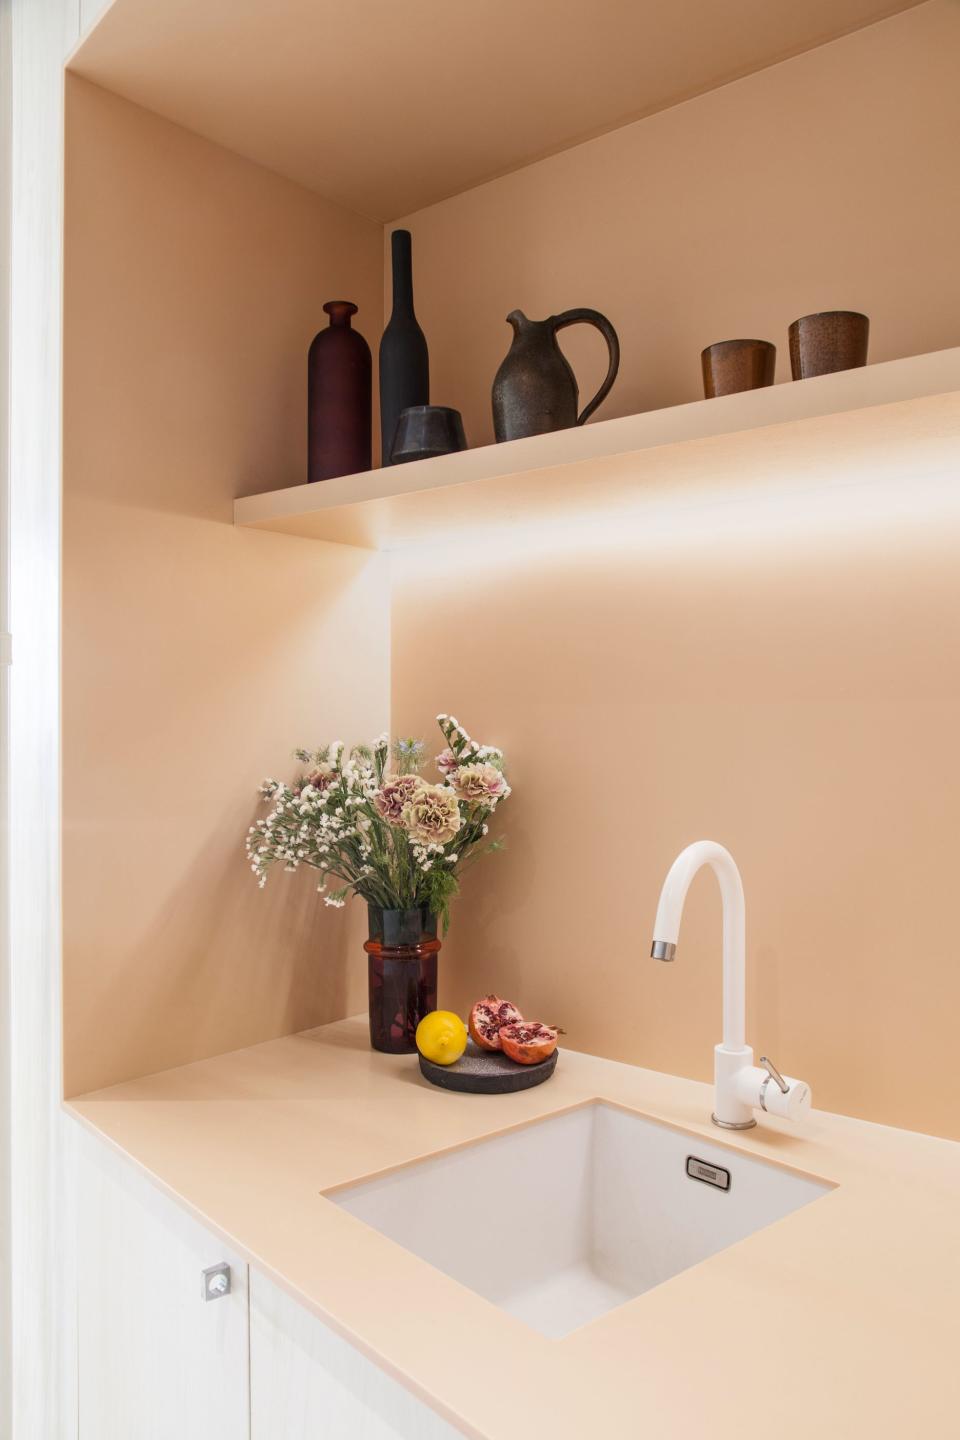 LED strip lighting in the kitchen is minimal and effective. The shelf was painted to match the color of the Corian.